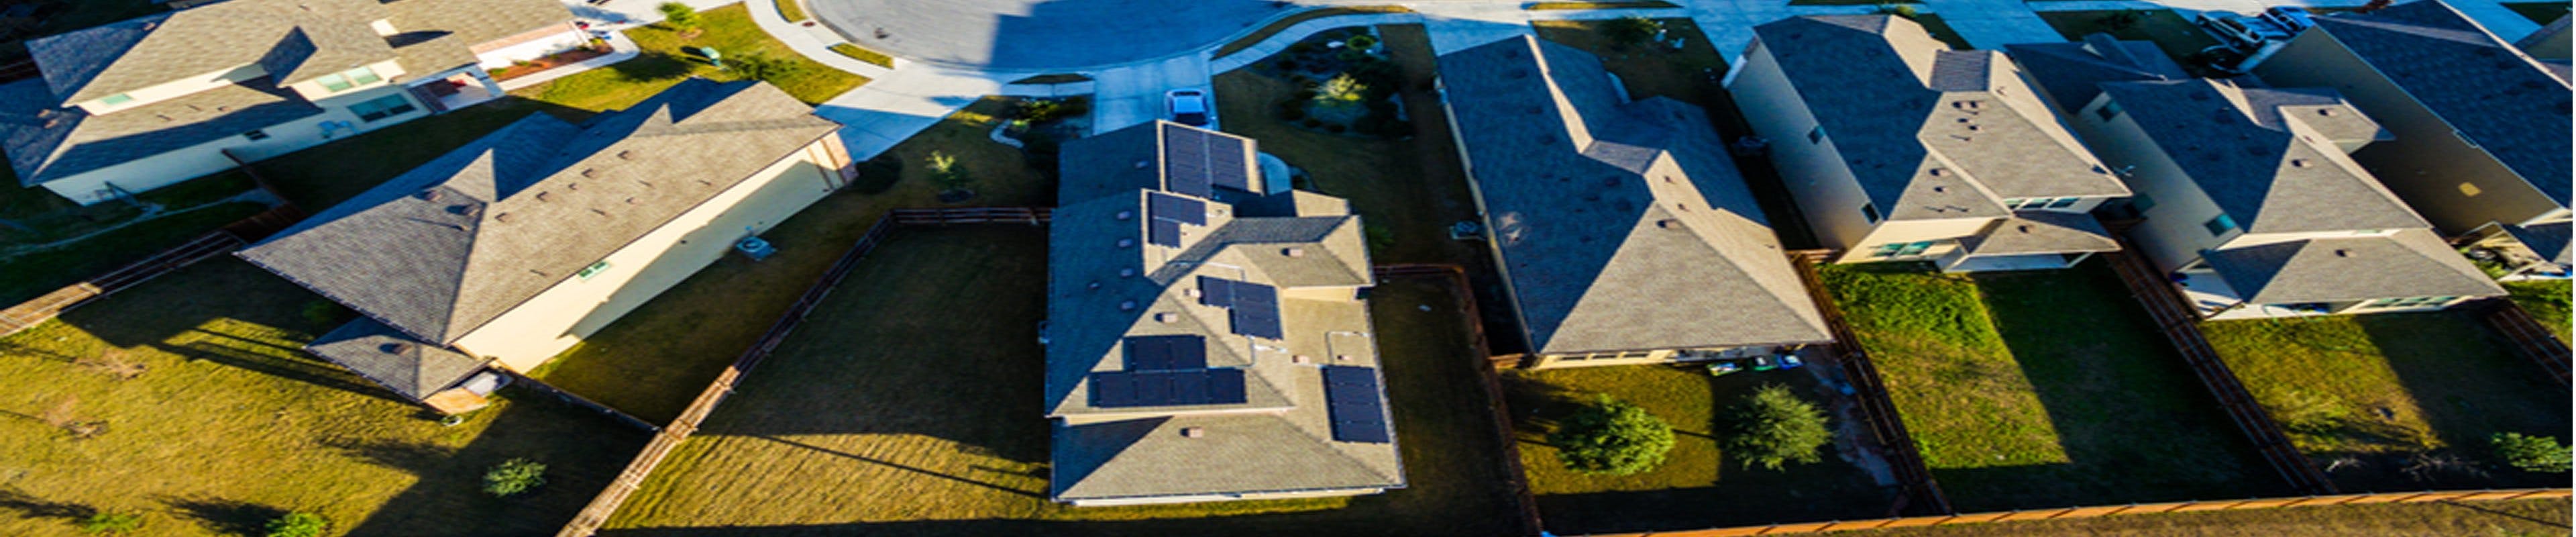 aerial view of a neighborhood with solar panels on roofs